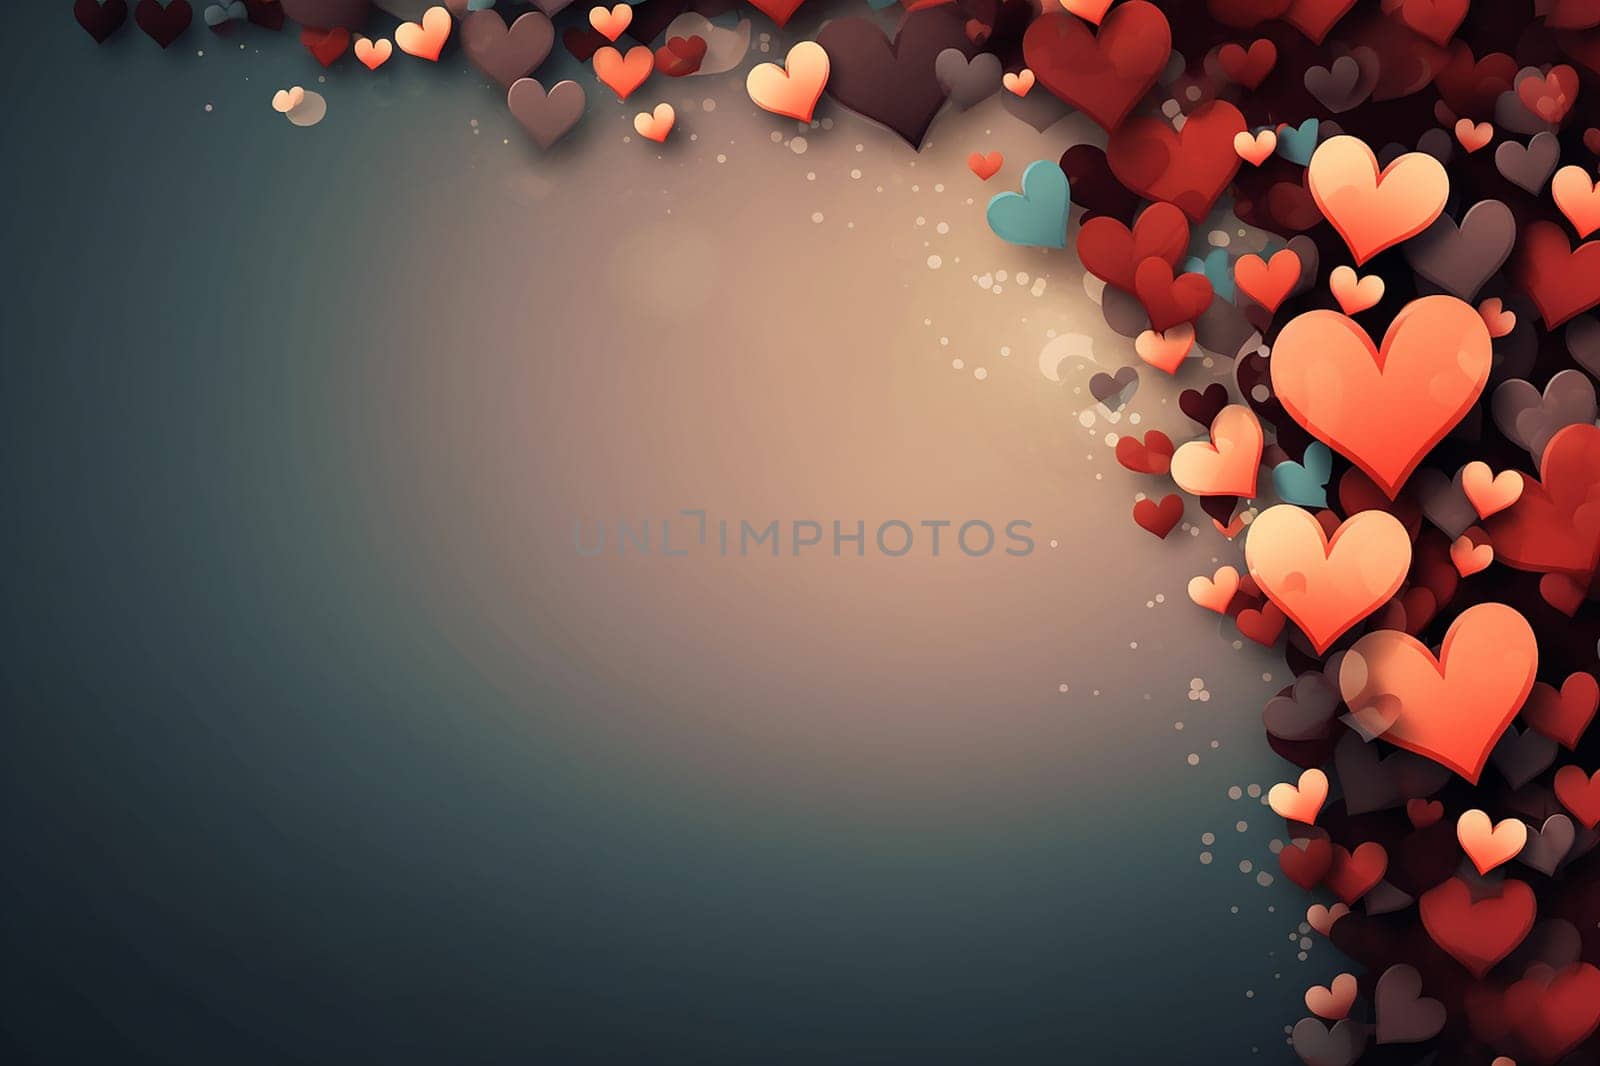 Abstract image of numerous hearts in shades of red and orange on blue background